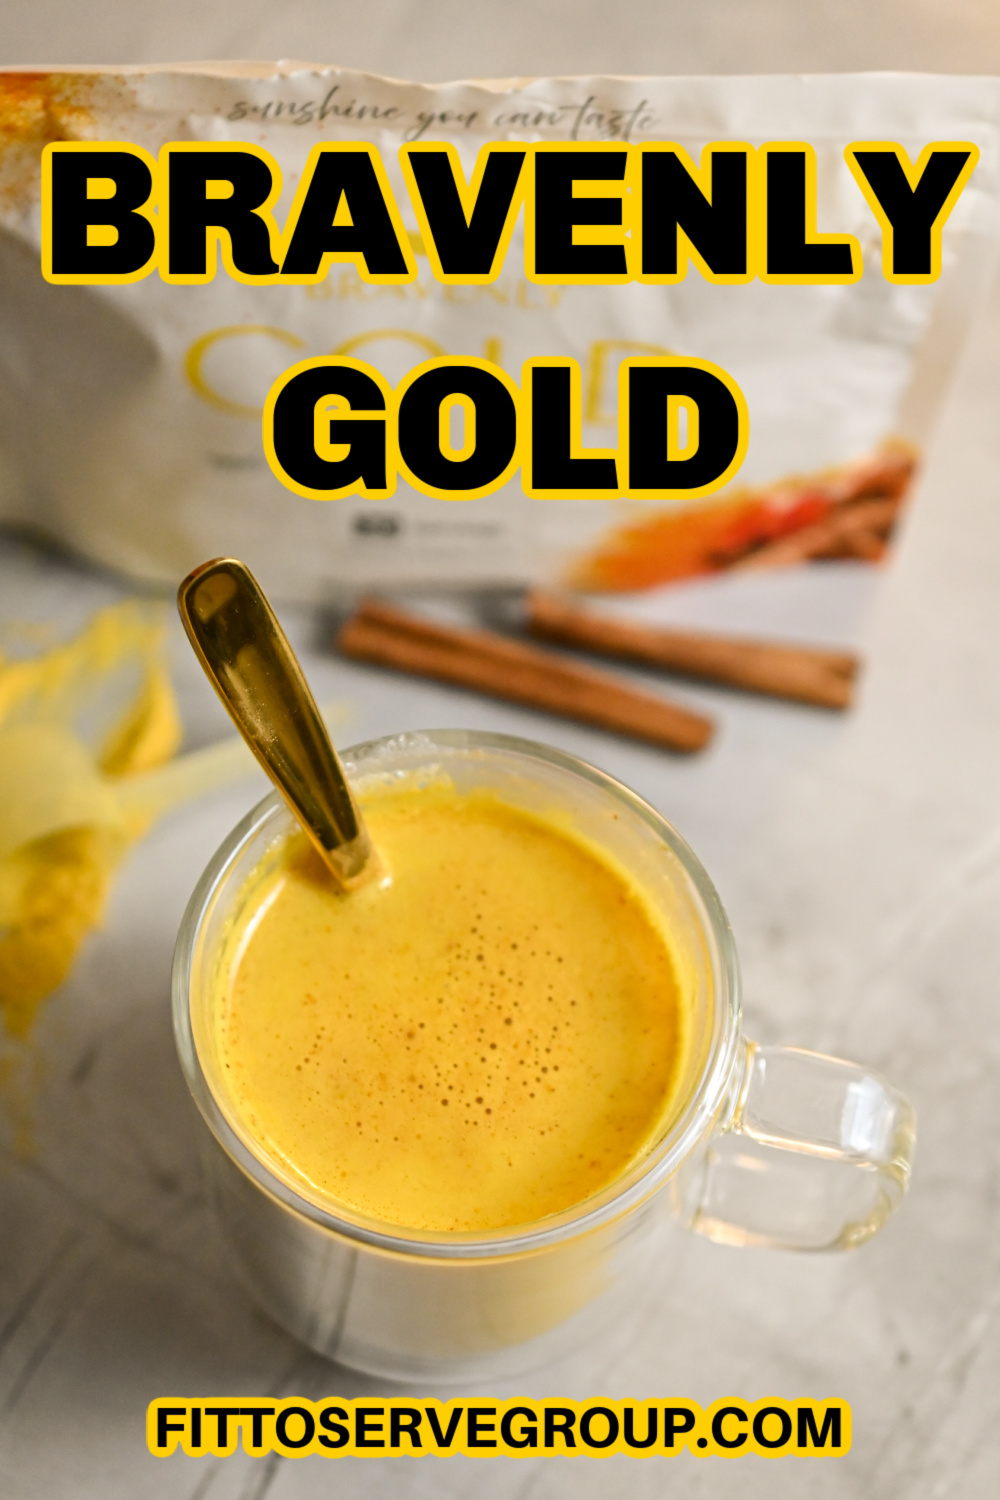 Bravenly Gold turmeric milk supplement is an instant turmeric latte drink that is a breeze to prepare, delicious, and good for you! Golden milk latte| Golden milk| Golden milk benefits